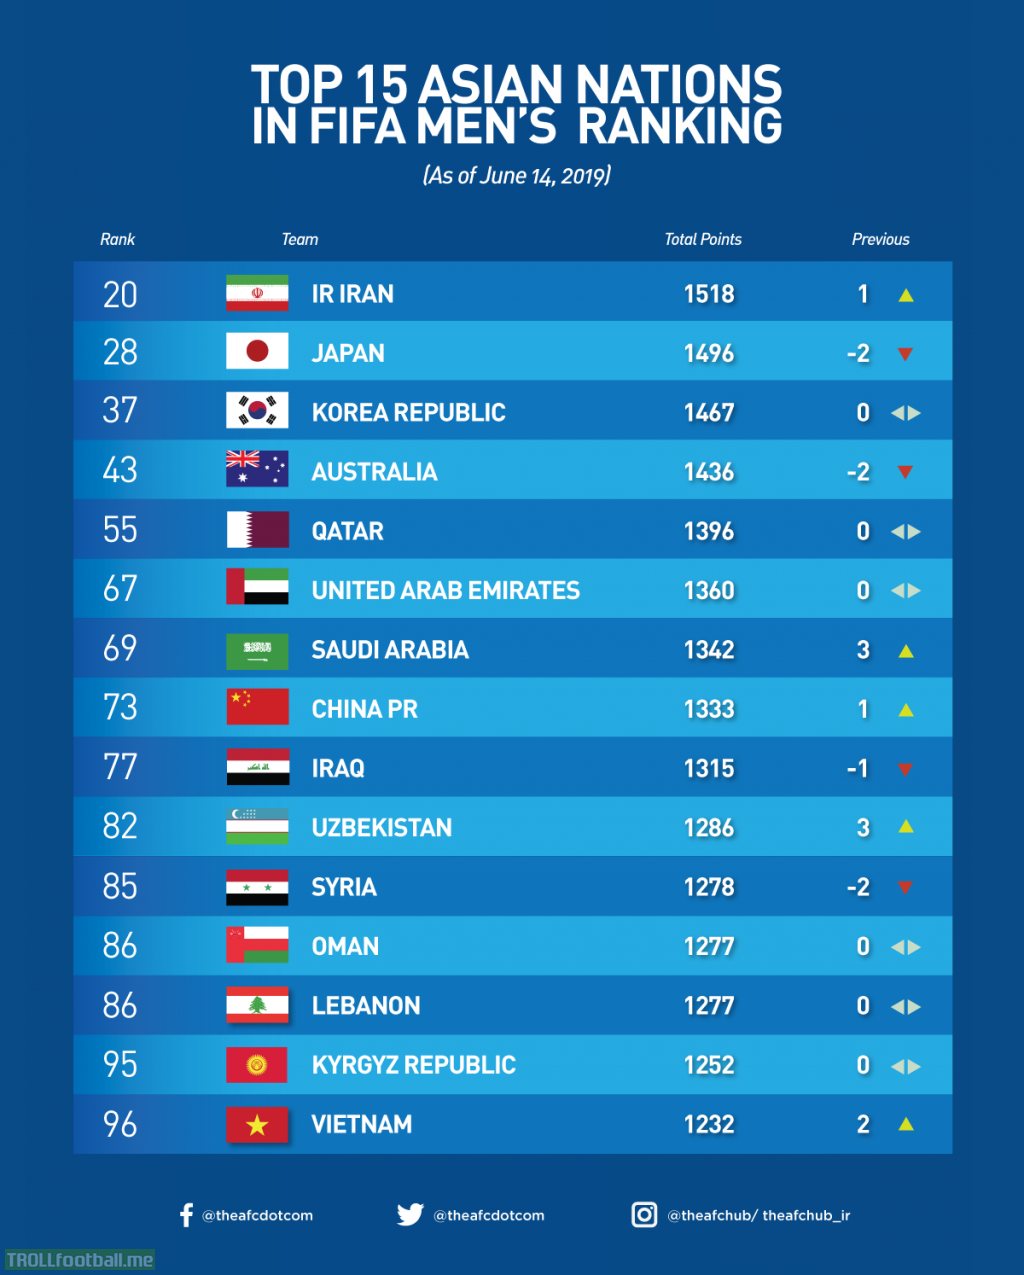 Top 15 Asian Nations in FIFA Men's Ranking (As of June 14, 2019)